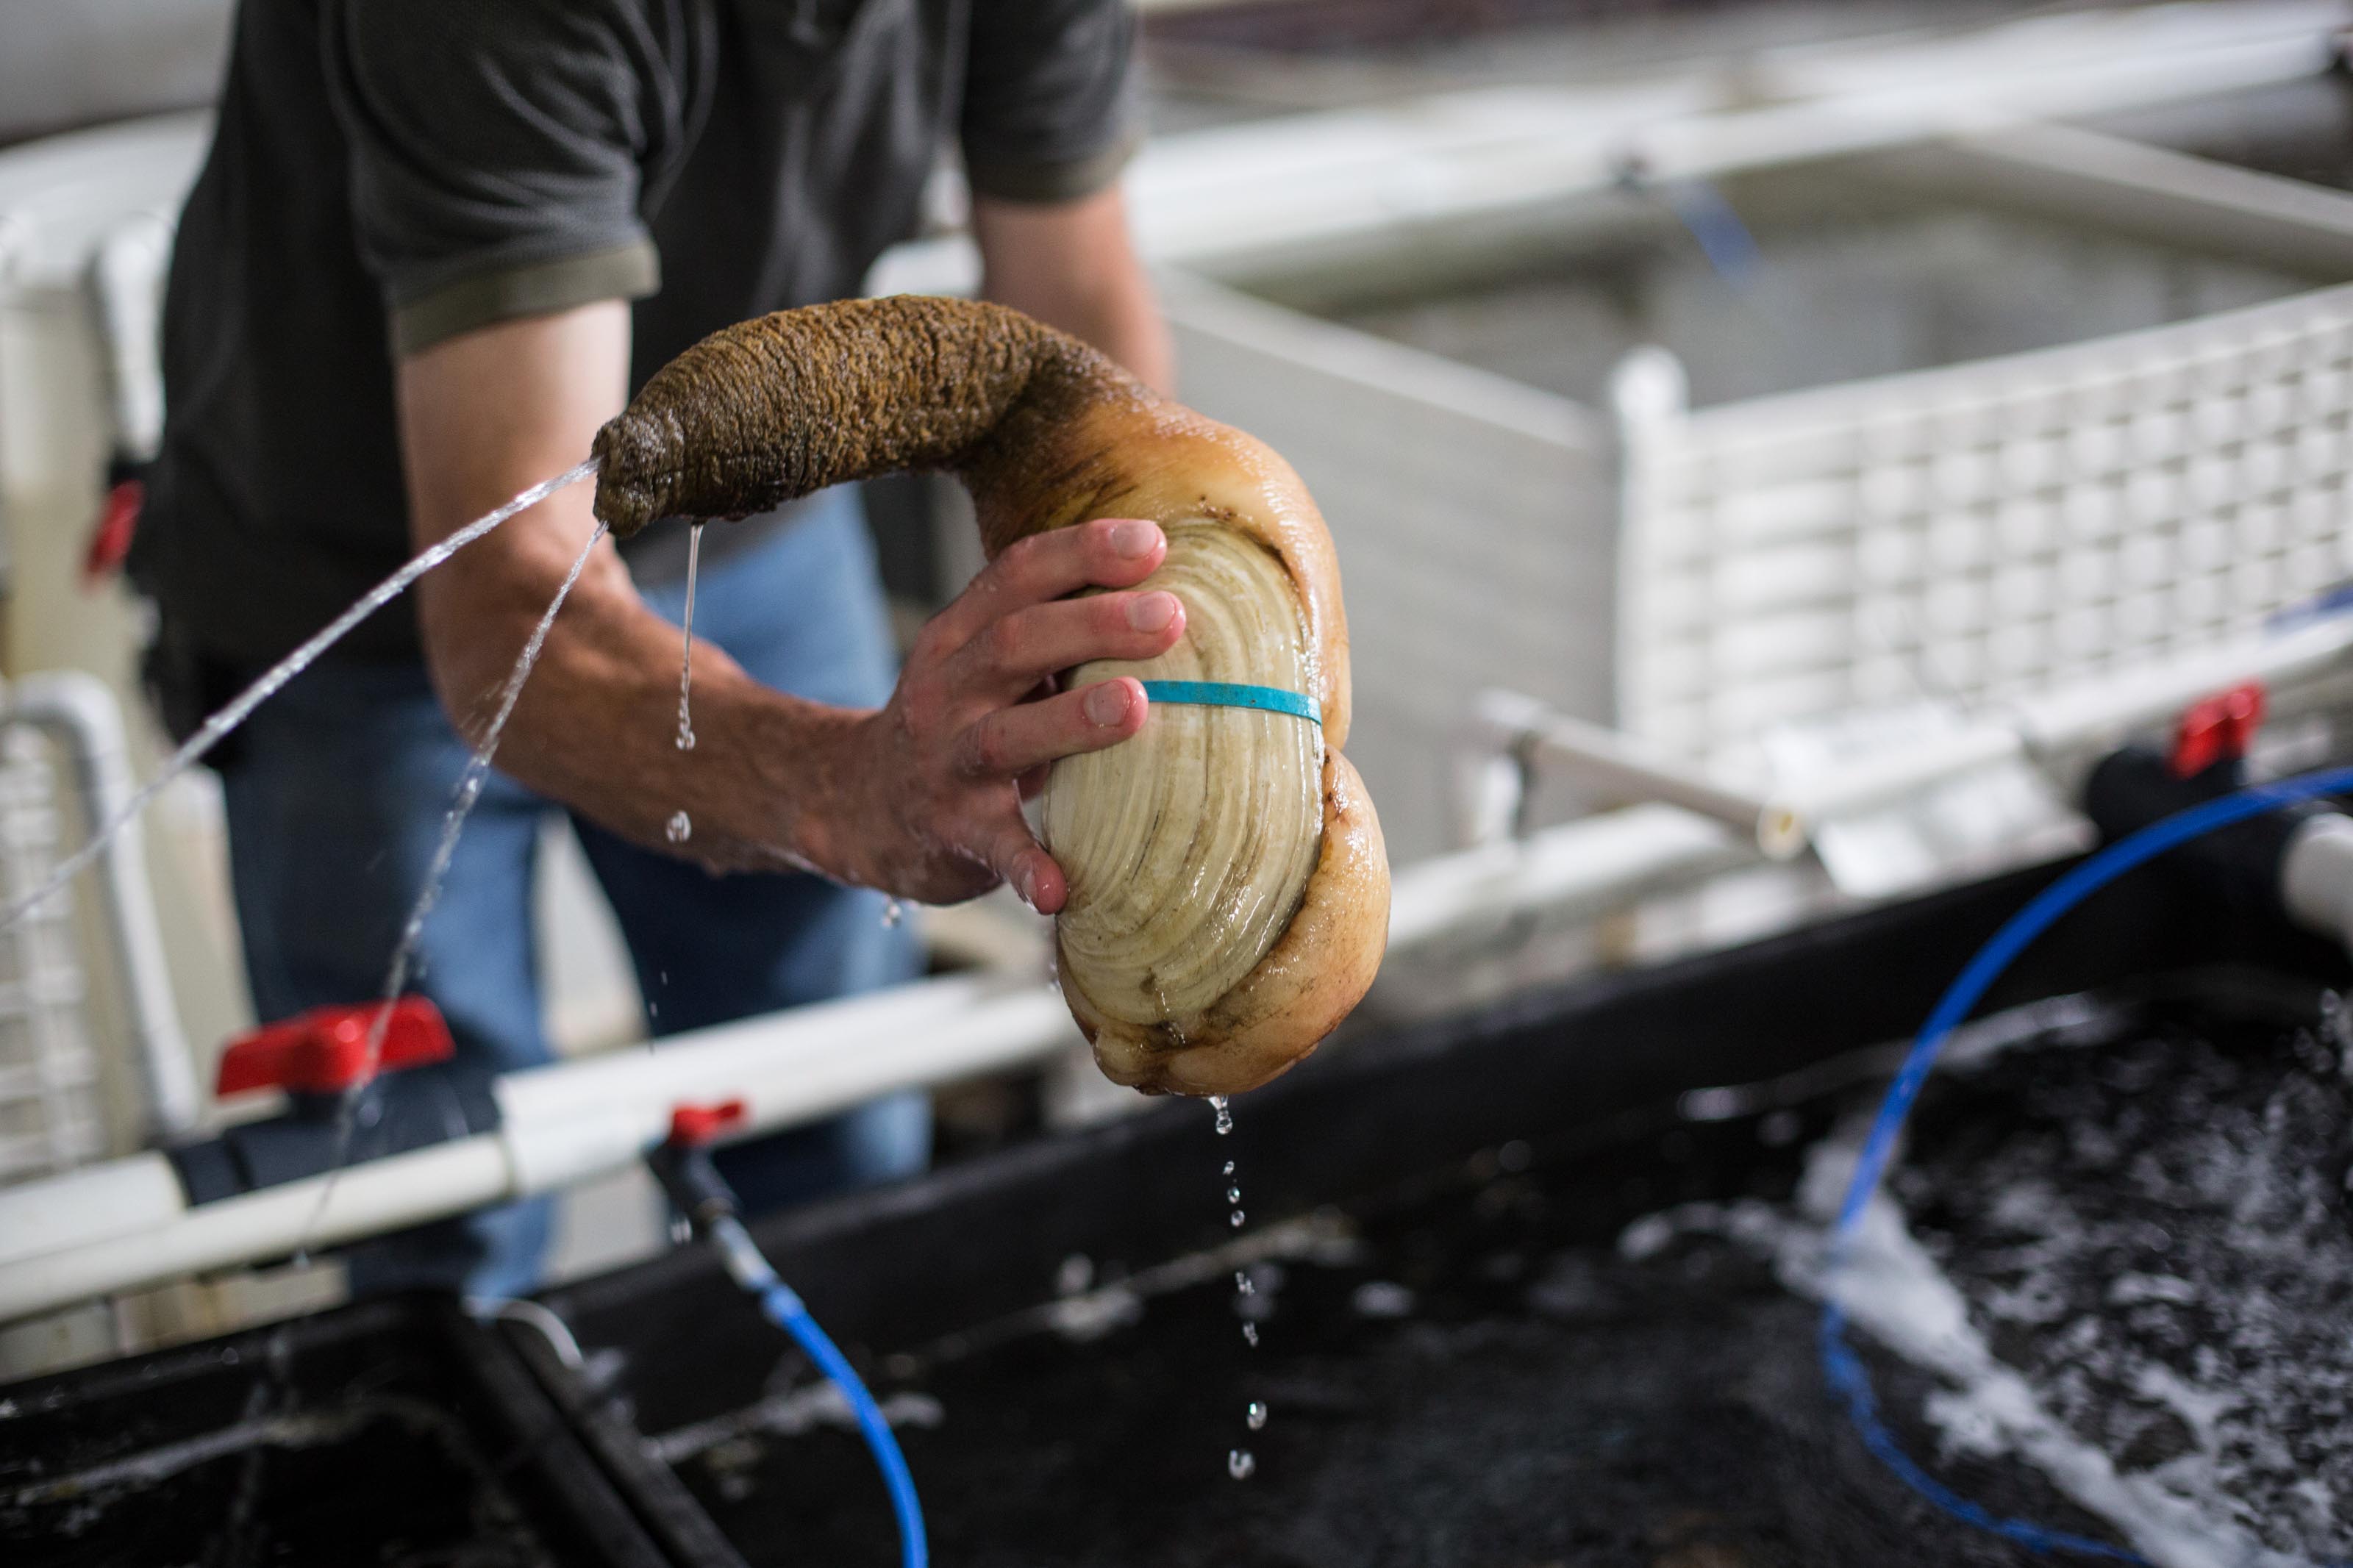 Follow A Geoduck The World S Most Nsfw Seafood From Mud To Plate Hot